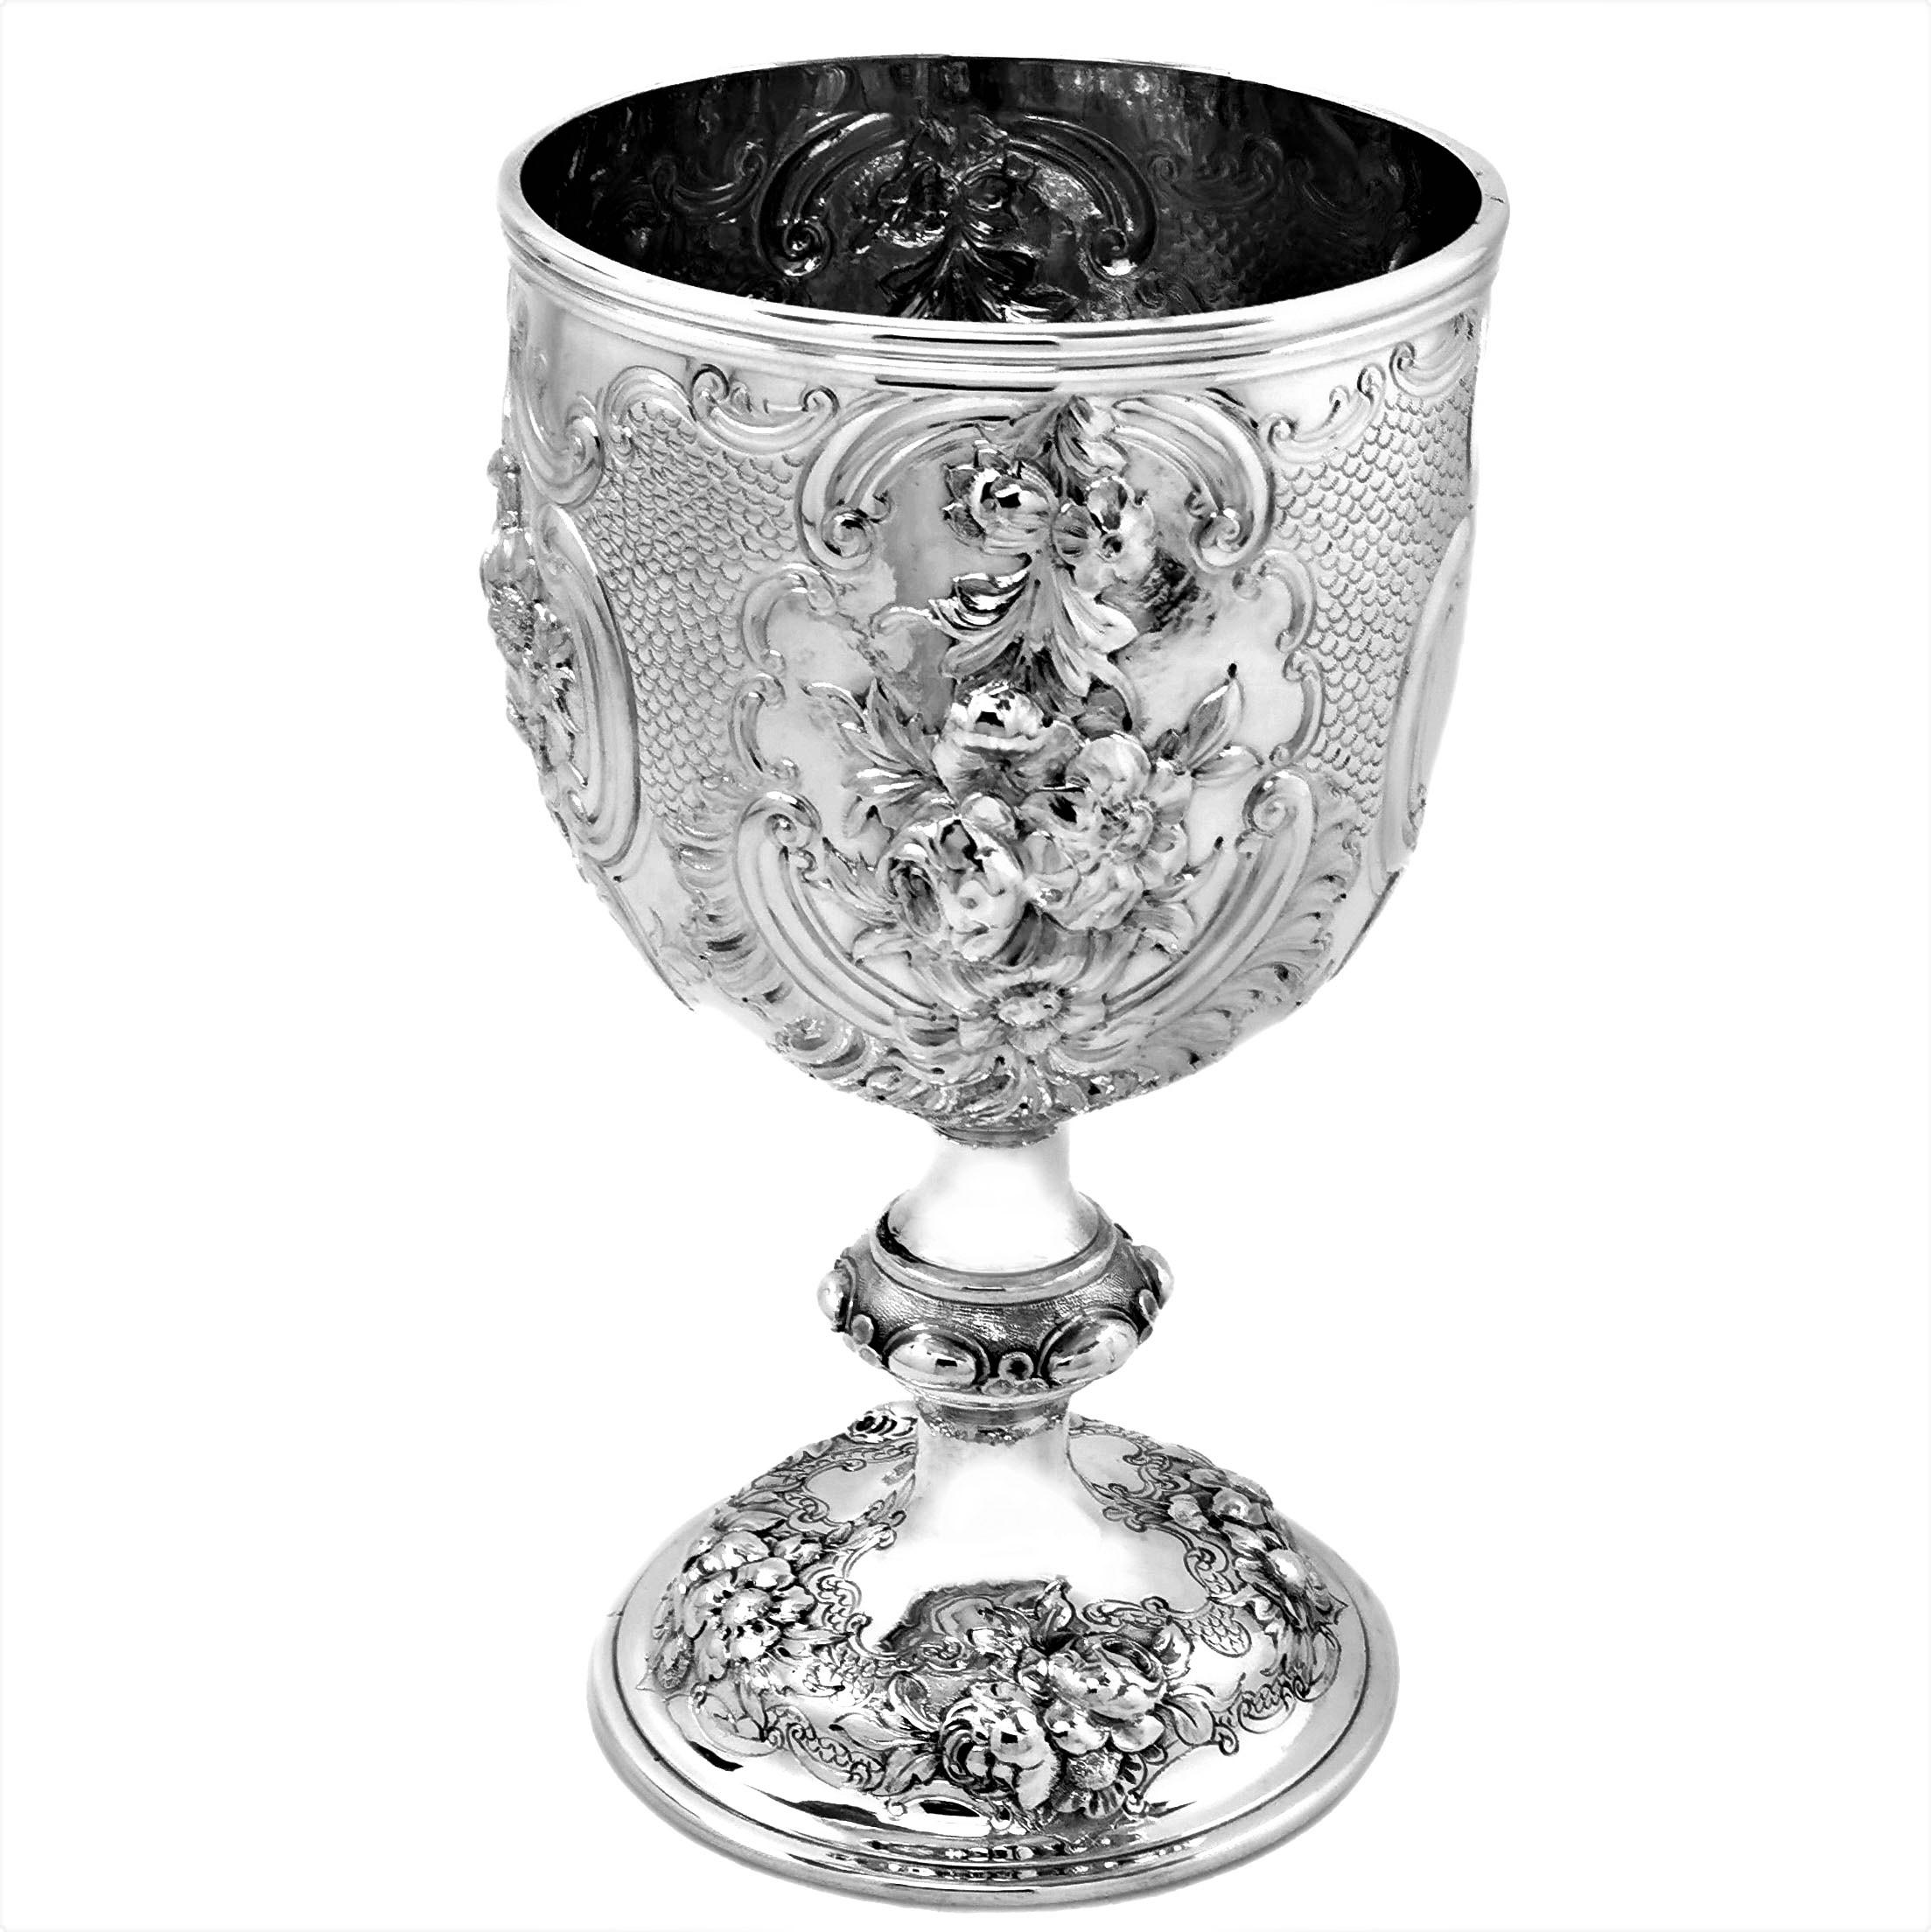 a large cup or goblet